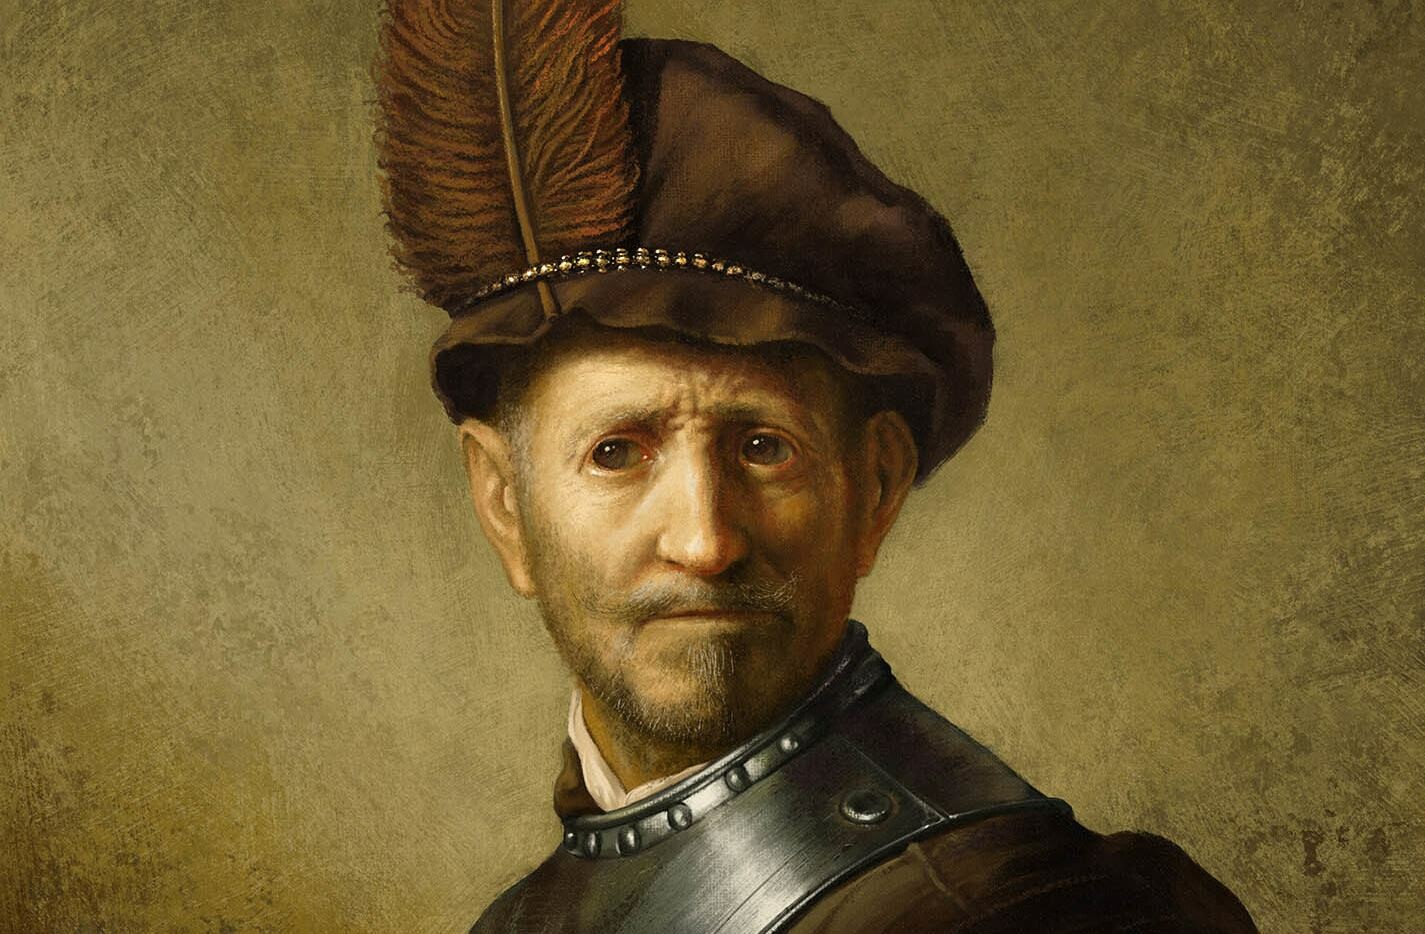 Digital Painting of a real Rembrandt - Old Style Portrait Painting